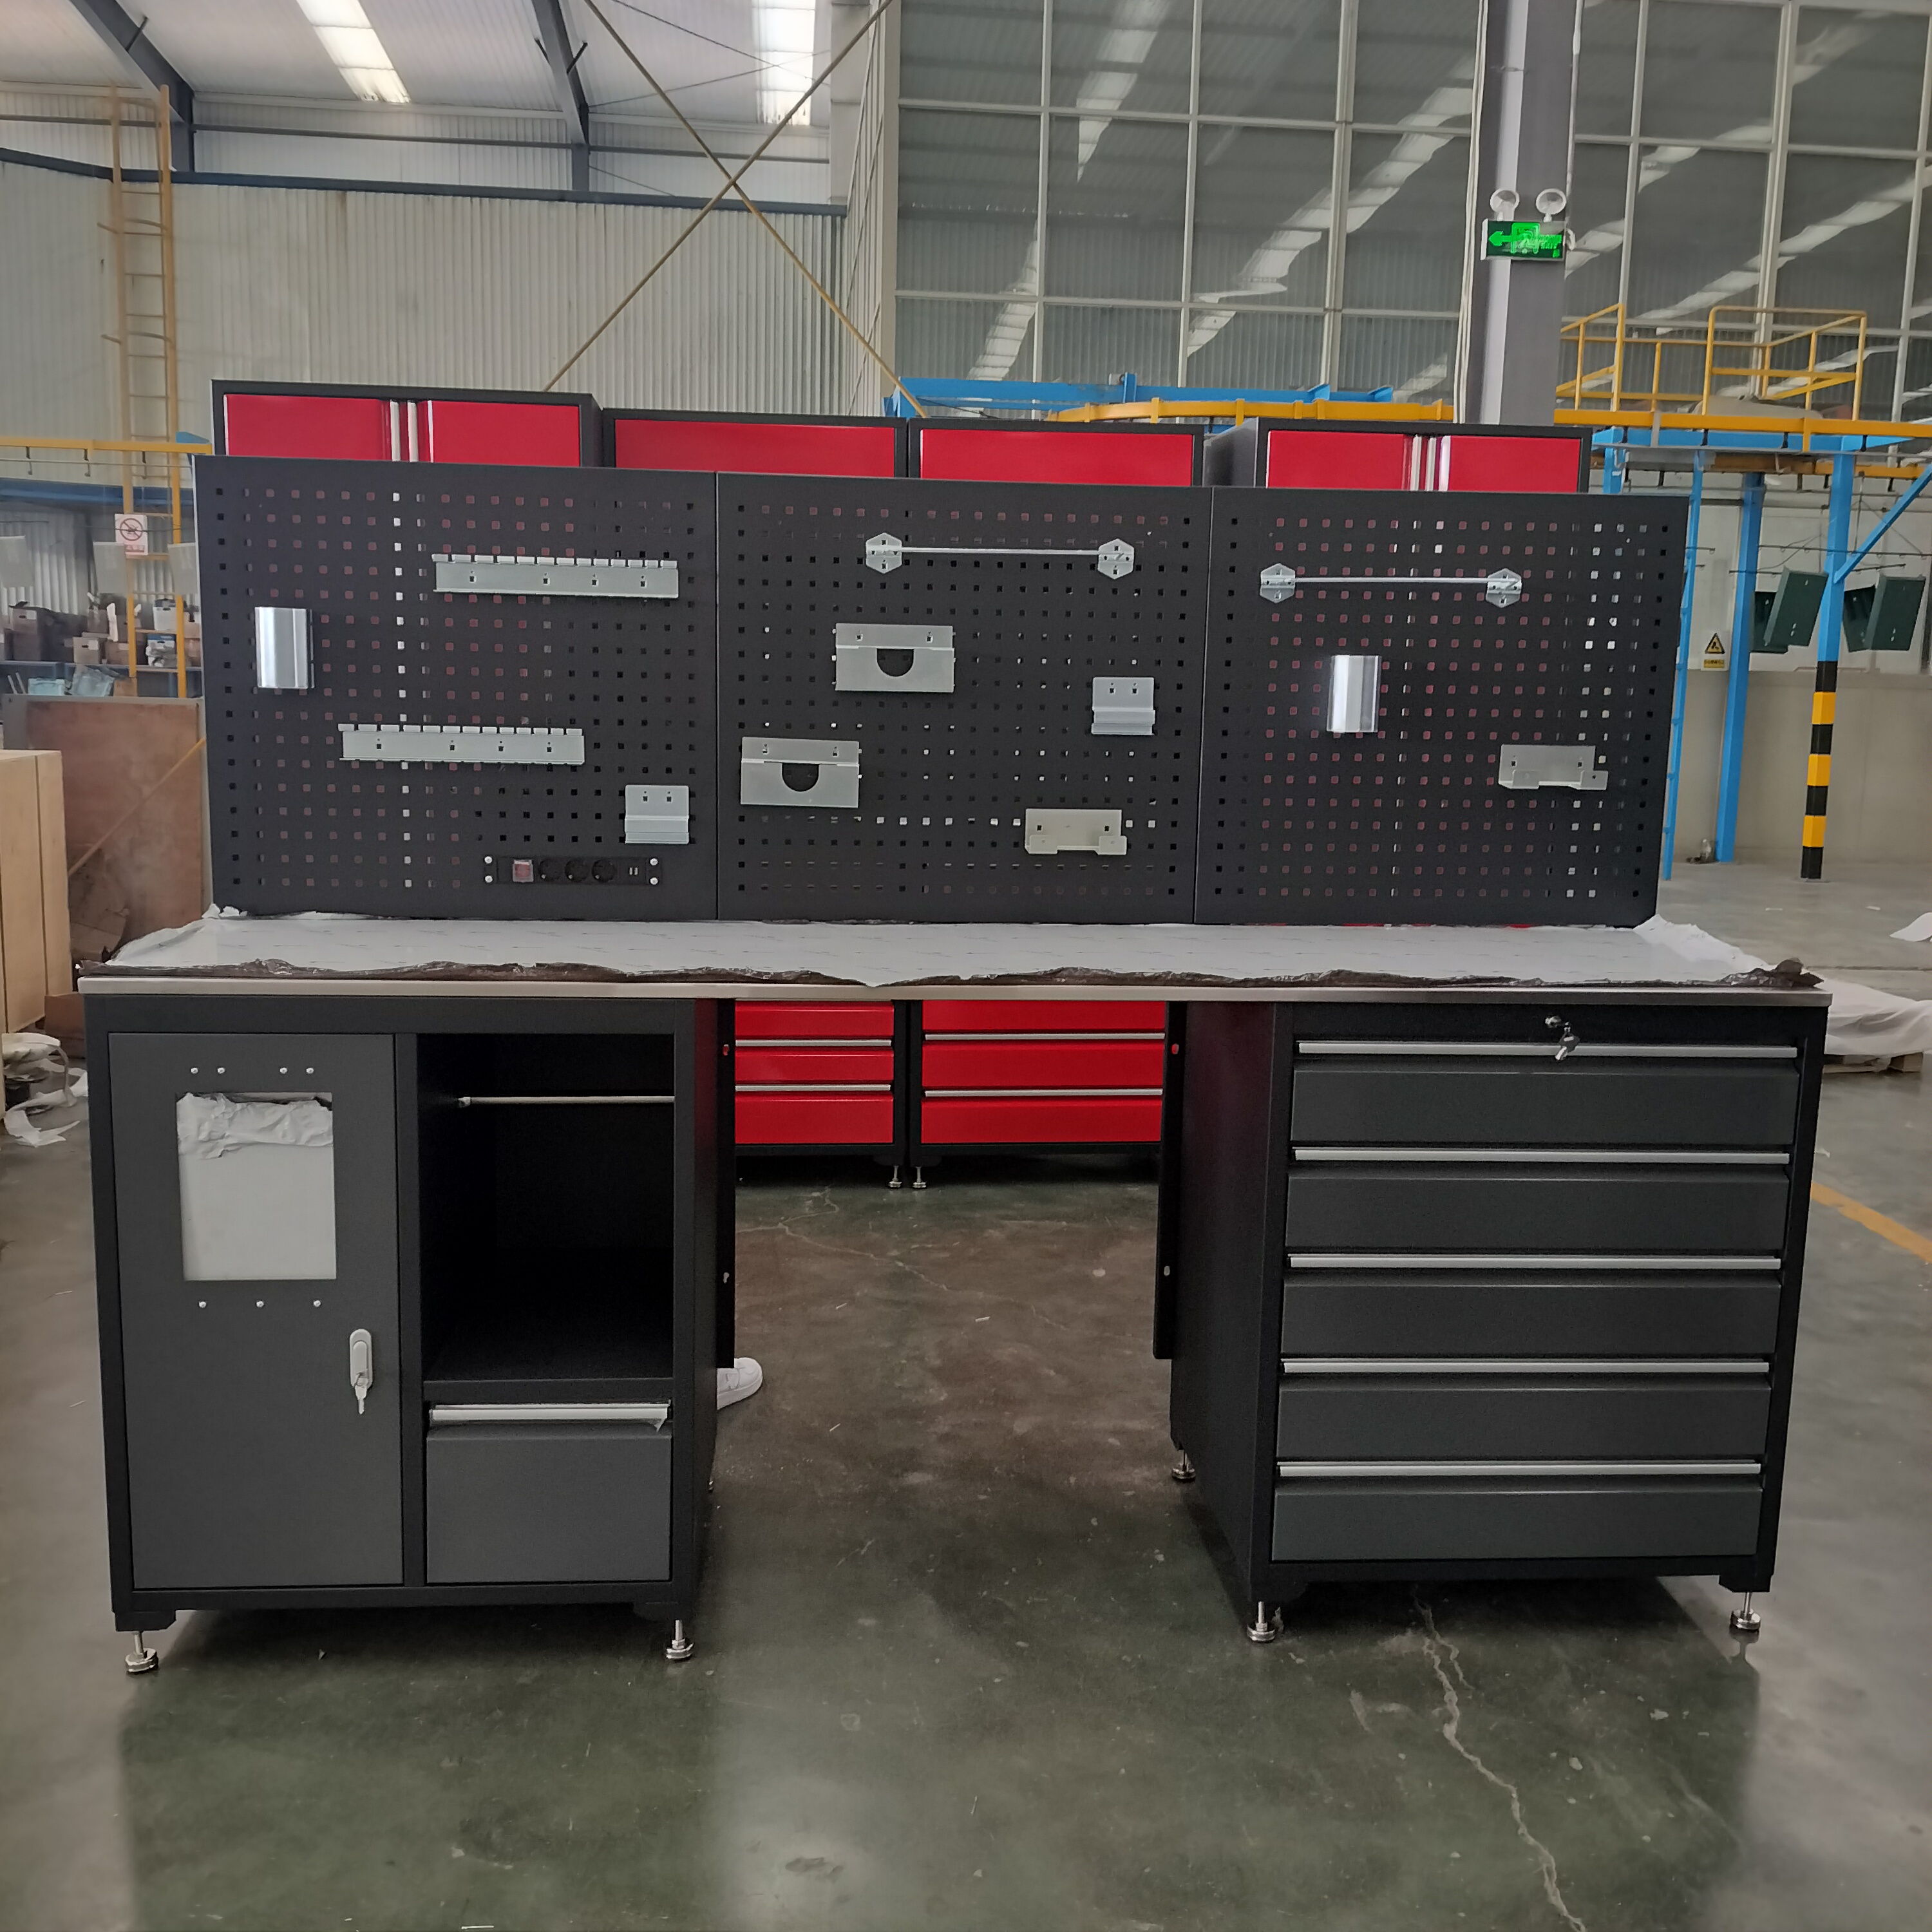 CYJY Company's new cold rolled steel factory workbench has successfully completed production and is about to be shipped!